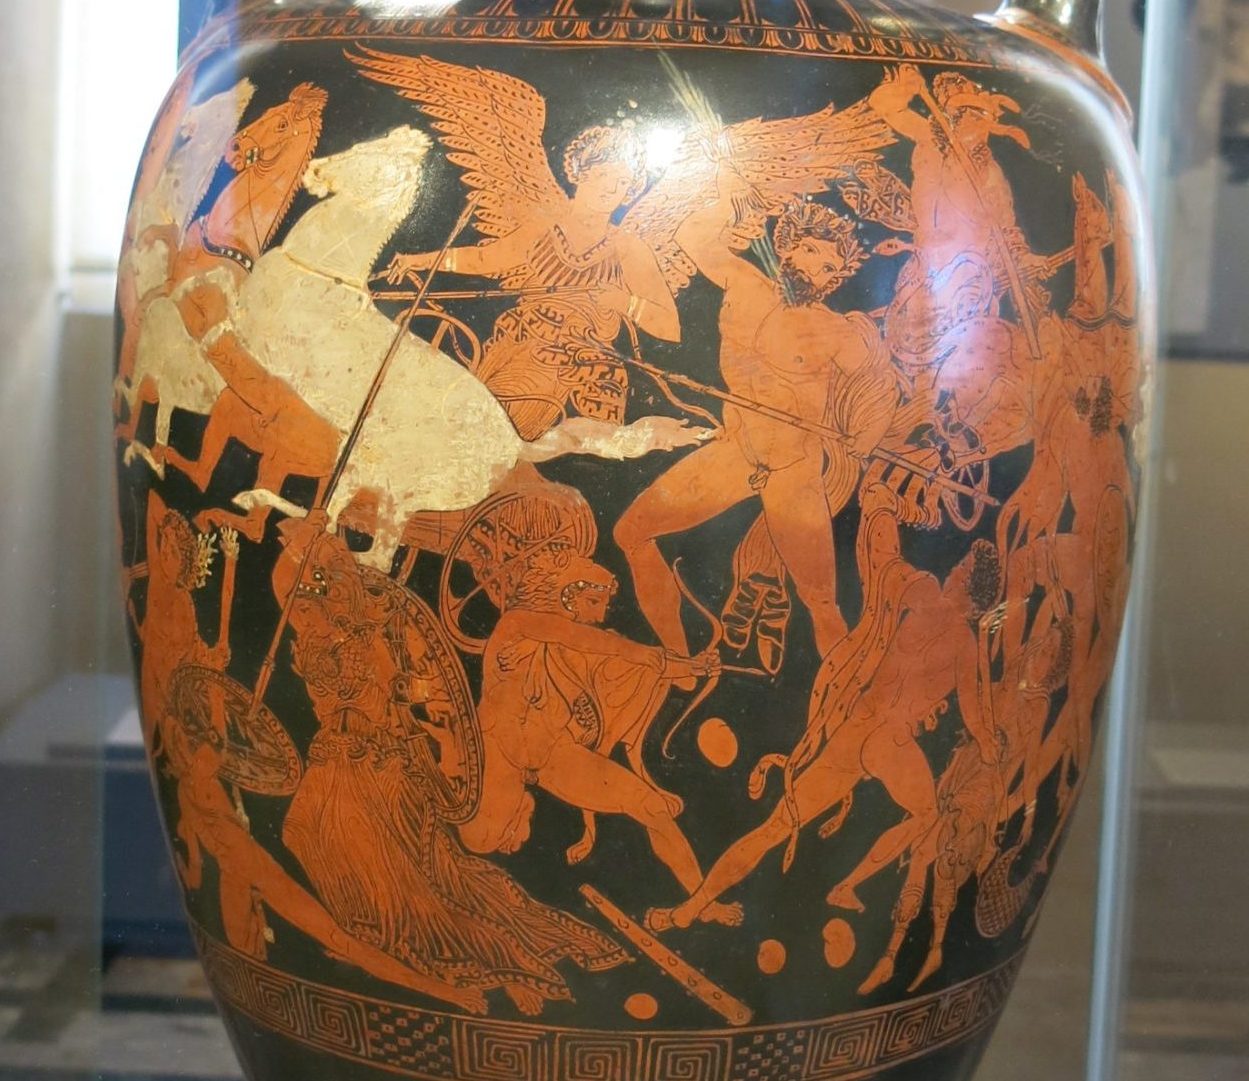 Winged Nike rides in a horse-drawn chariot. Other gods, including Zeus with his lightning bolt, Athena with helm and spear, and Heracles with a bow and lion skin, are engaged in battle with giants.